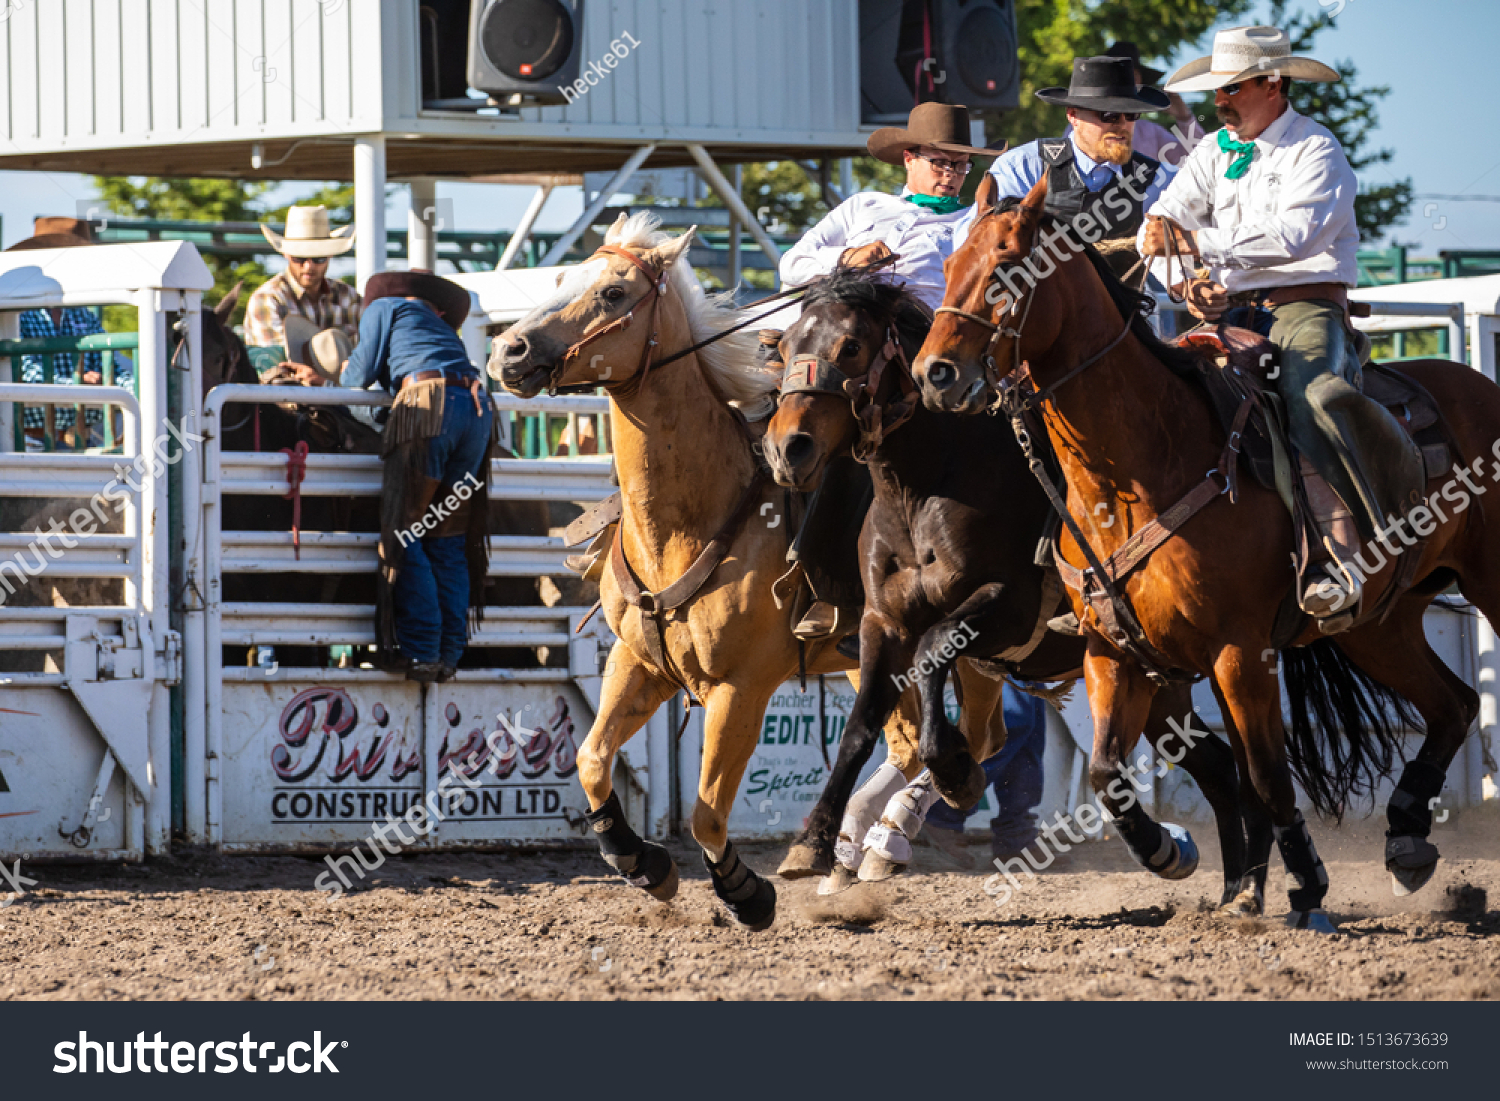 Rodeo and Bronco Riding at Pincher Creek Canada, June 16, 2019 #1513673639